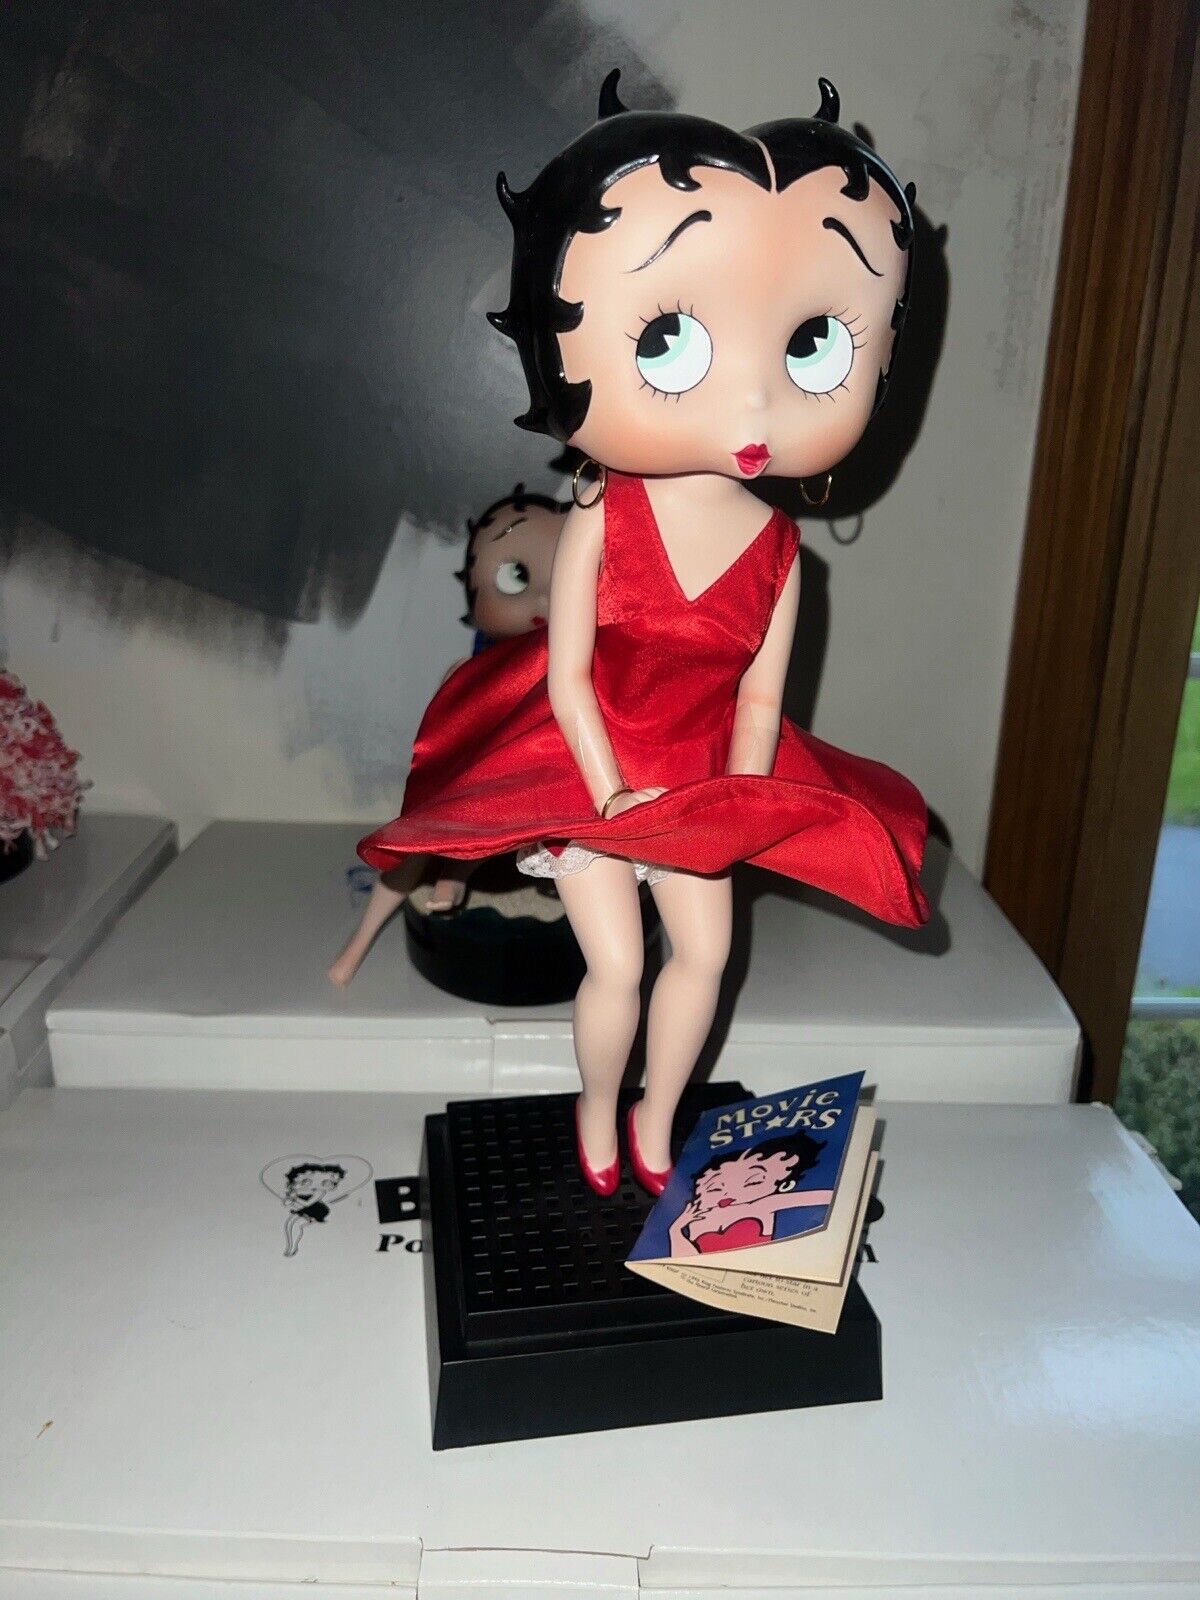 Betty Boop Figurine Danbury Mint Collection - 13 with Original Boxes